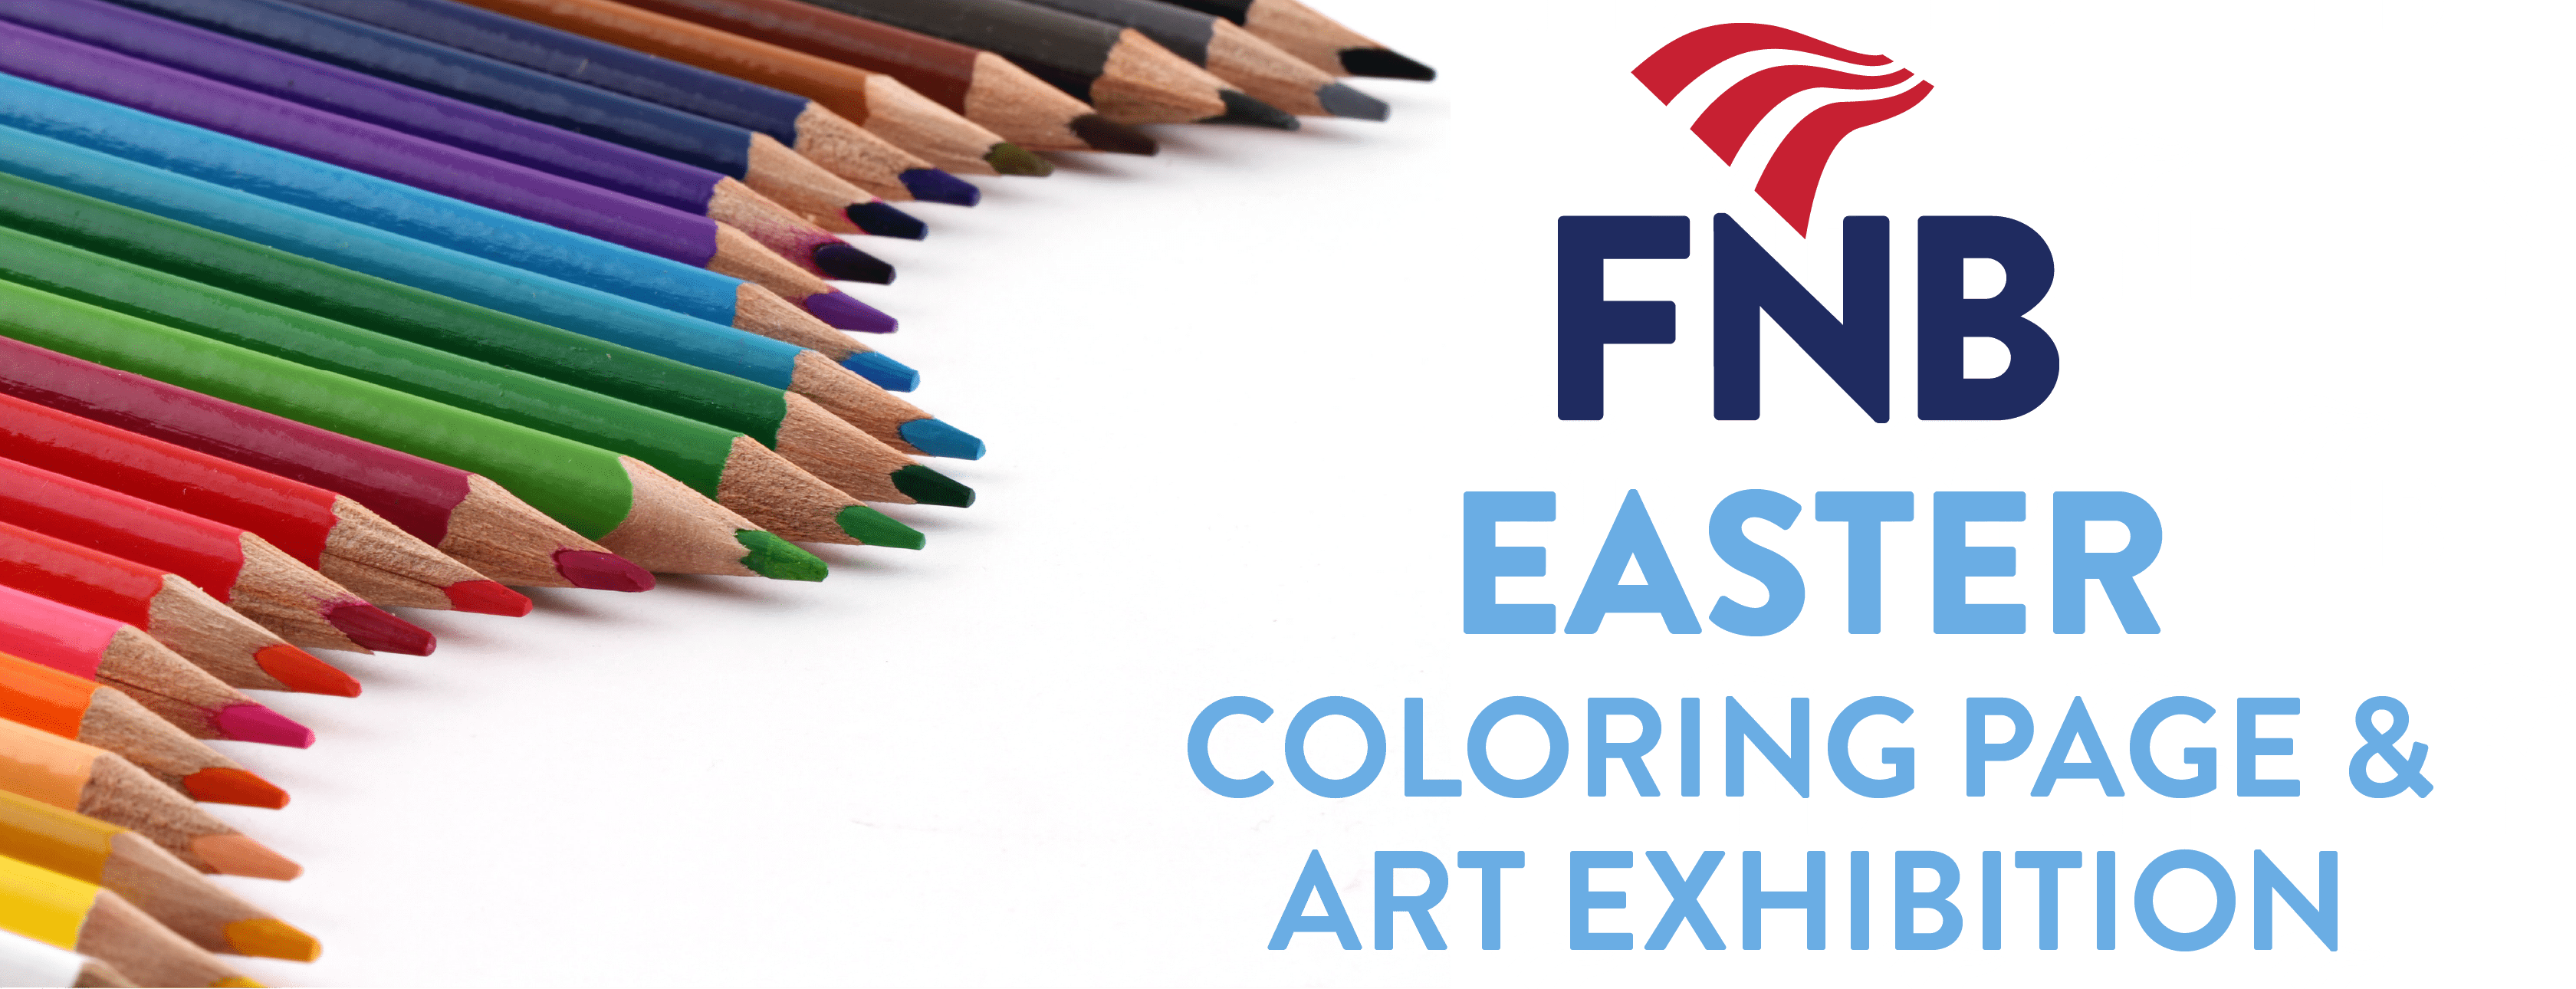 FNB's Easter Coloring Page and Art Exhibition